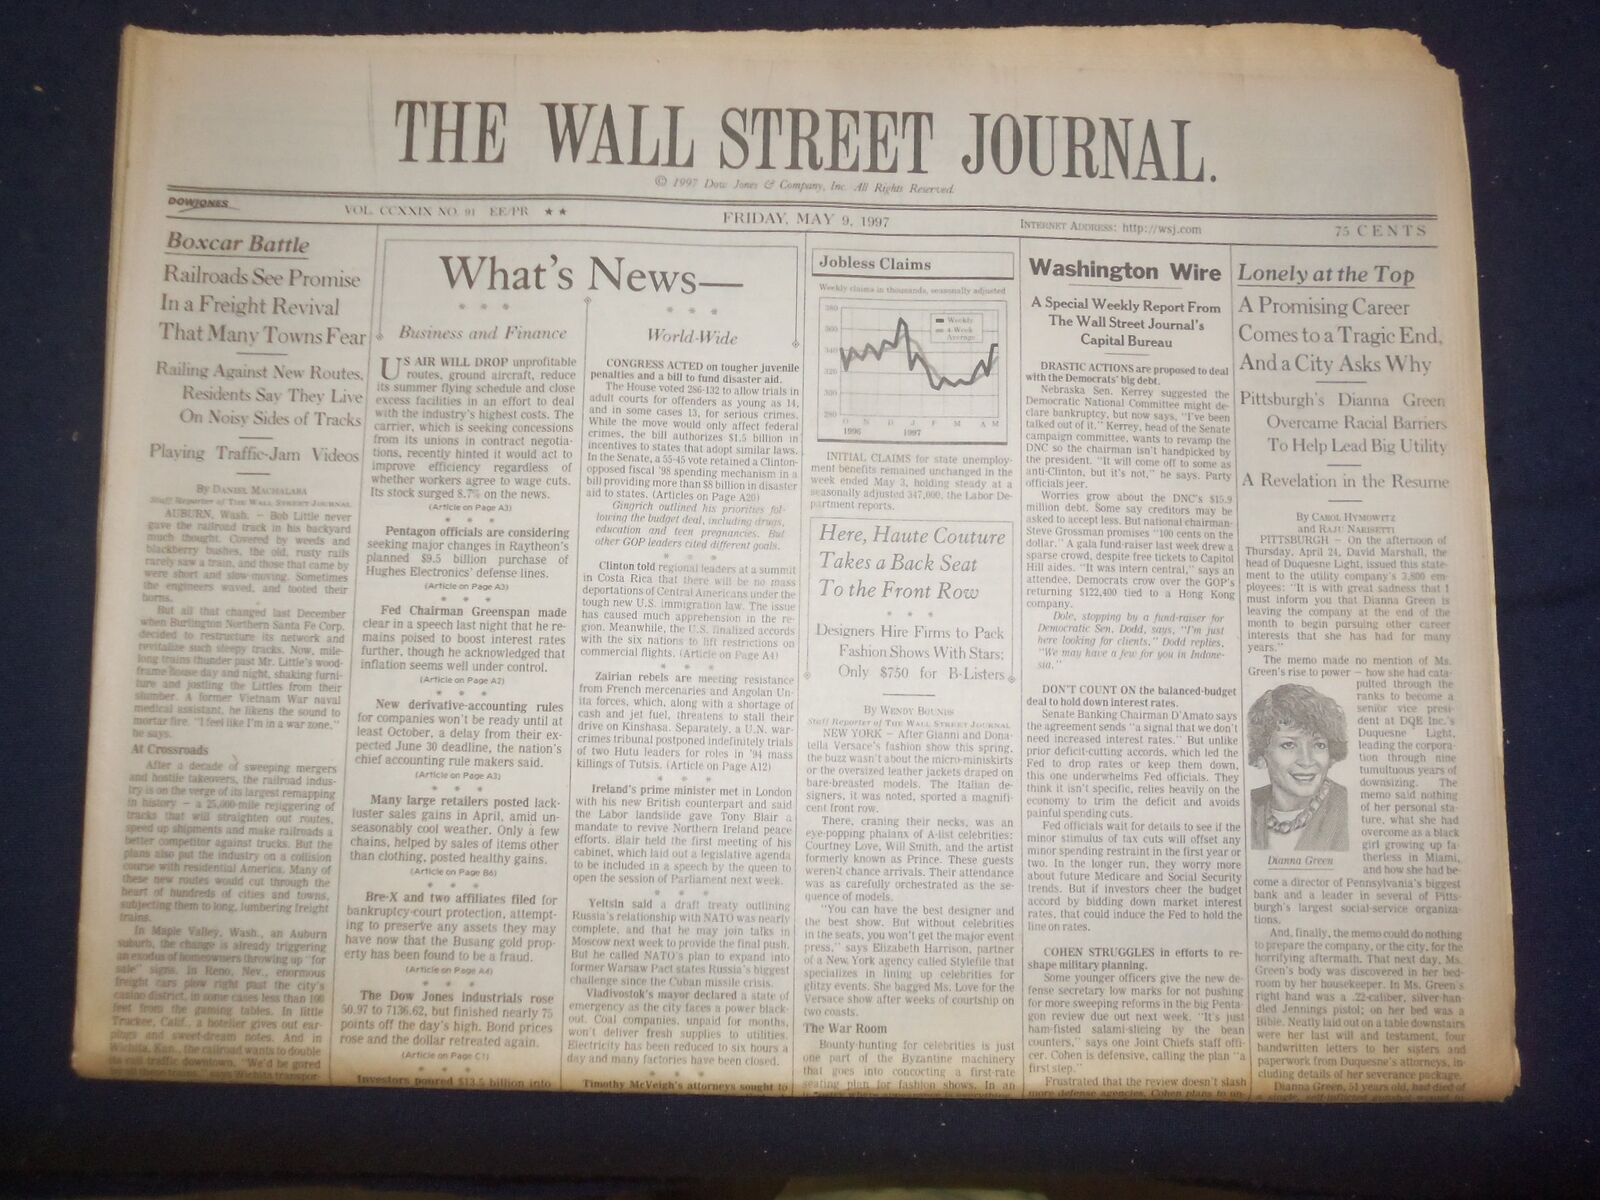 1997 MAY 9 THE WALL STREET JOURNAL - DIANNA GREEN, PROMISING CAREER ENDS- WJ 367